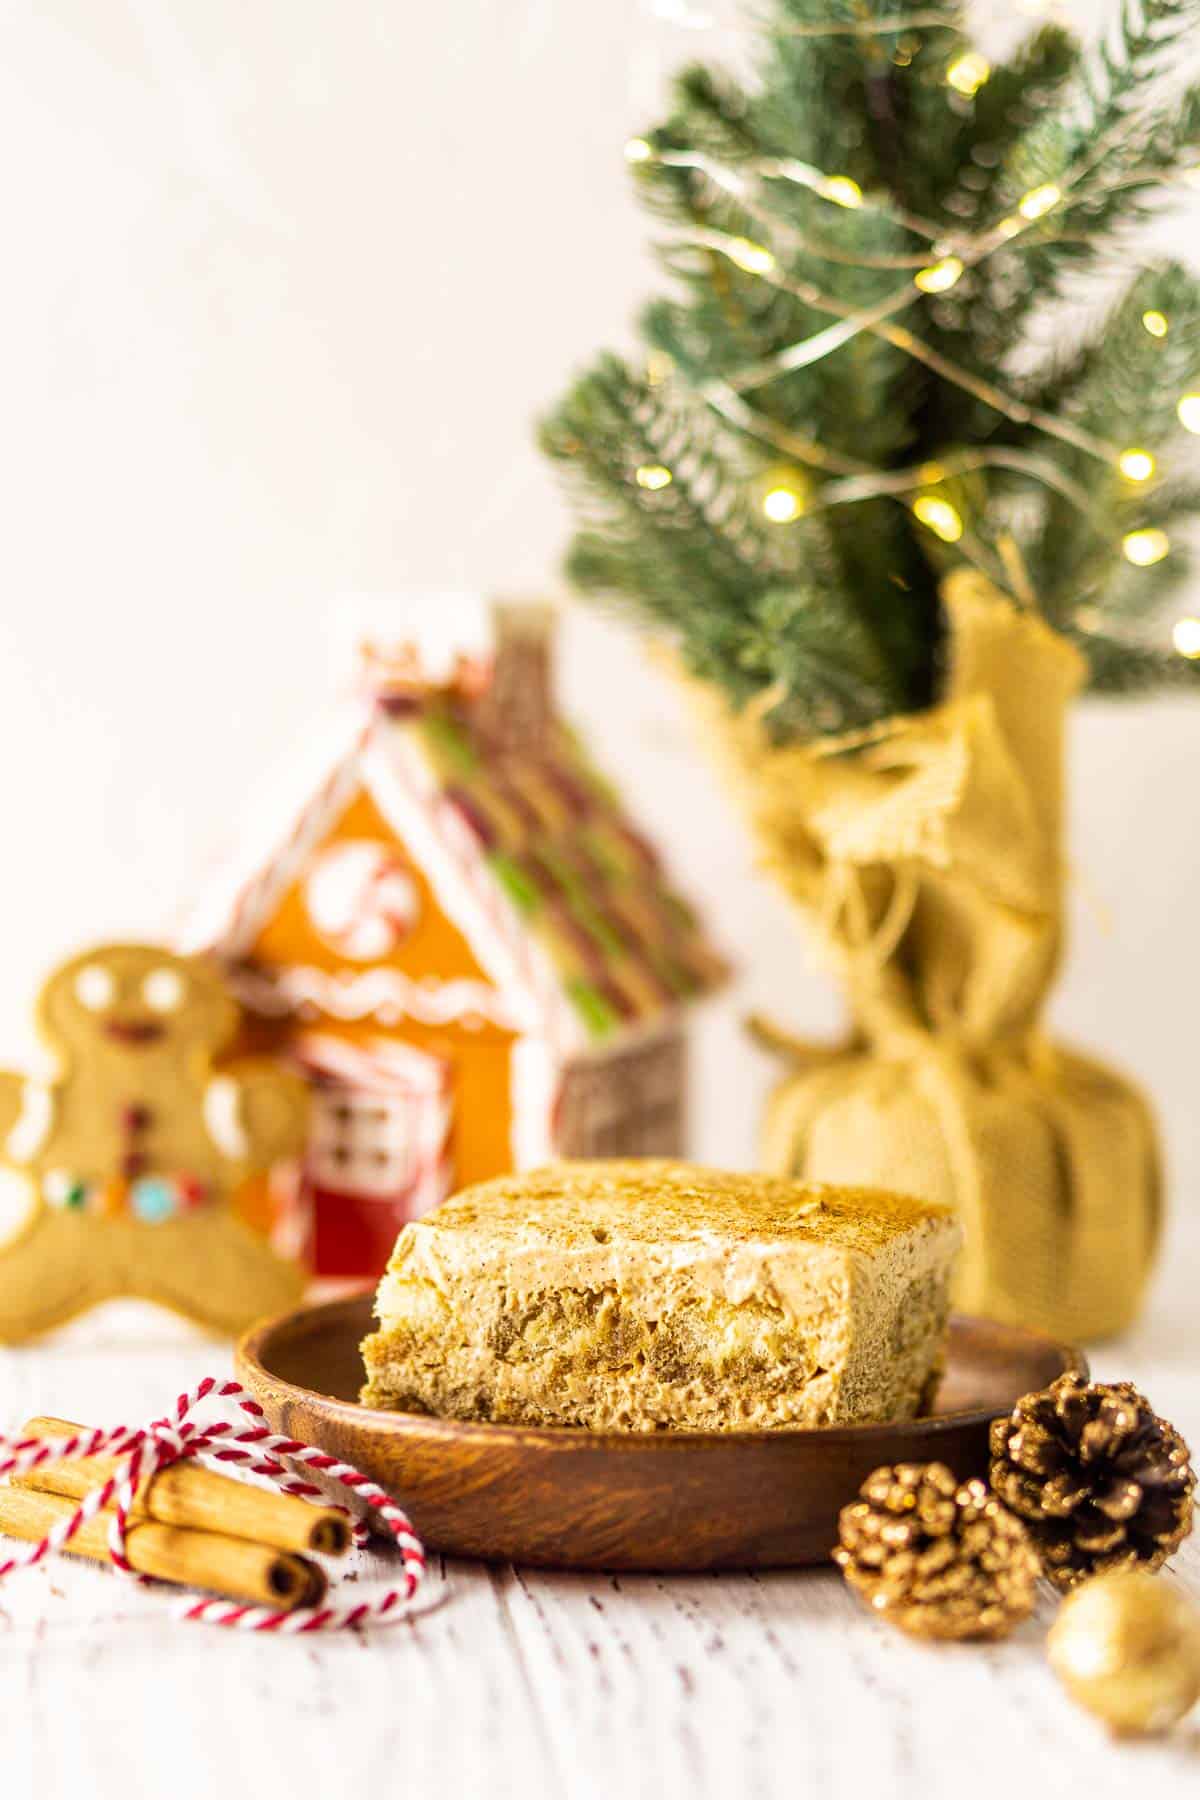 Looking straight on to the gingerbread tiramisu with a small Christmas tree and decor around it.